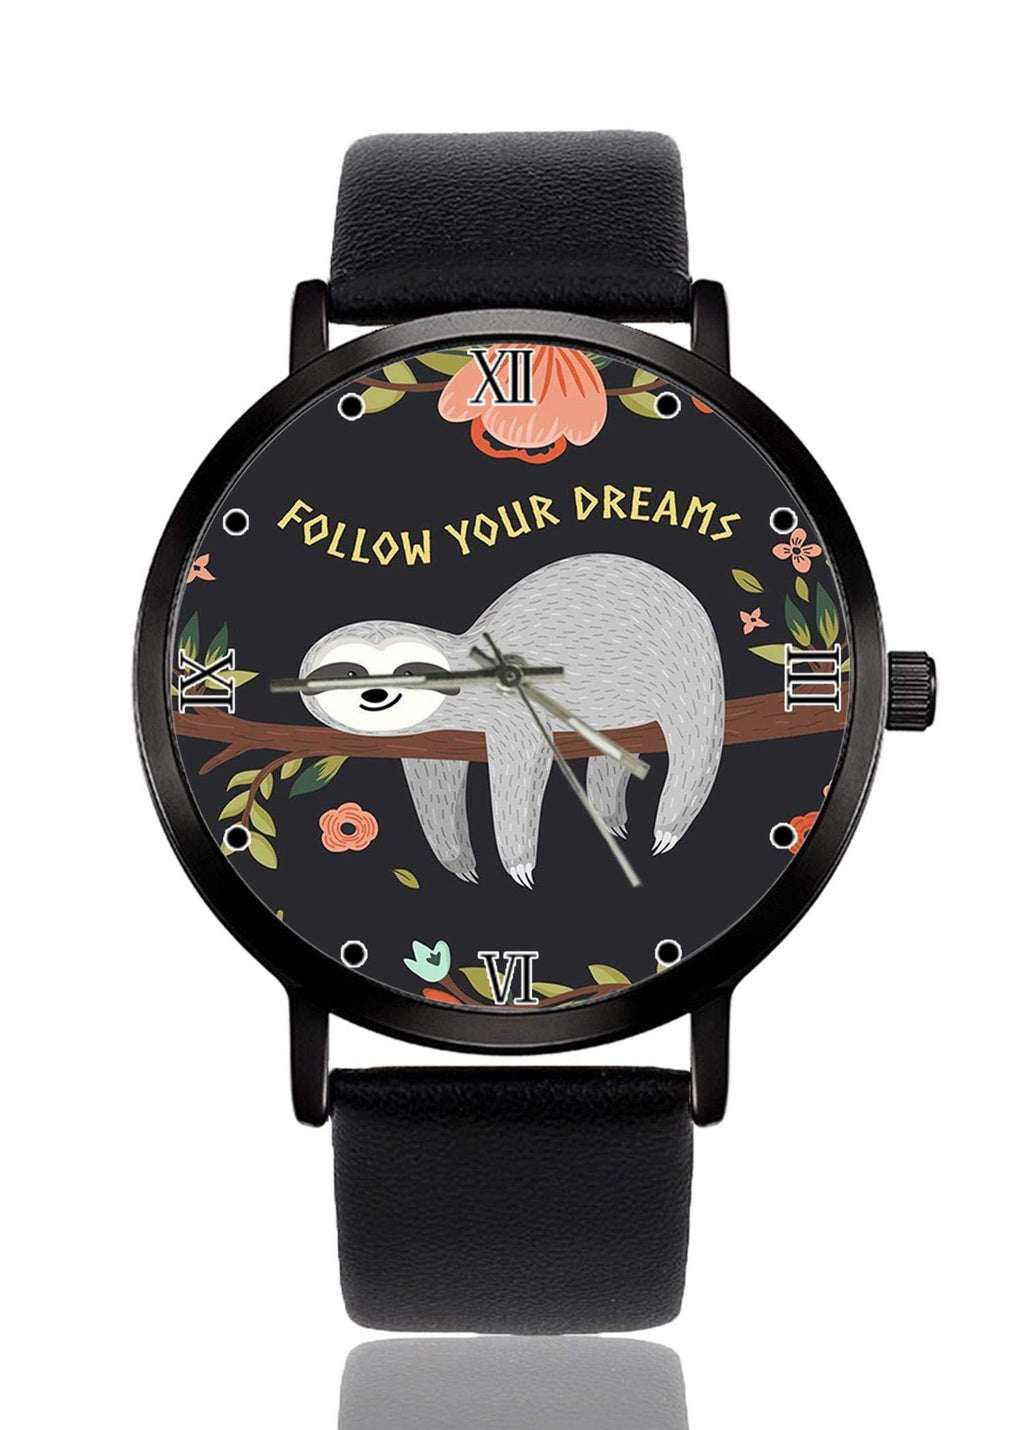 [Australia] - Watch Personalized Custom Watches Casual Black Leather Strap Wrist Watches for Men Women Unisex Baby Sloth 